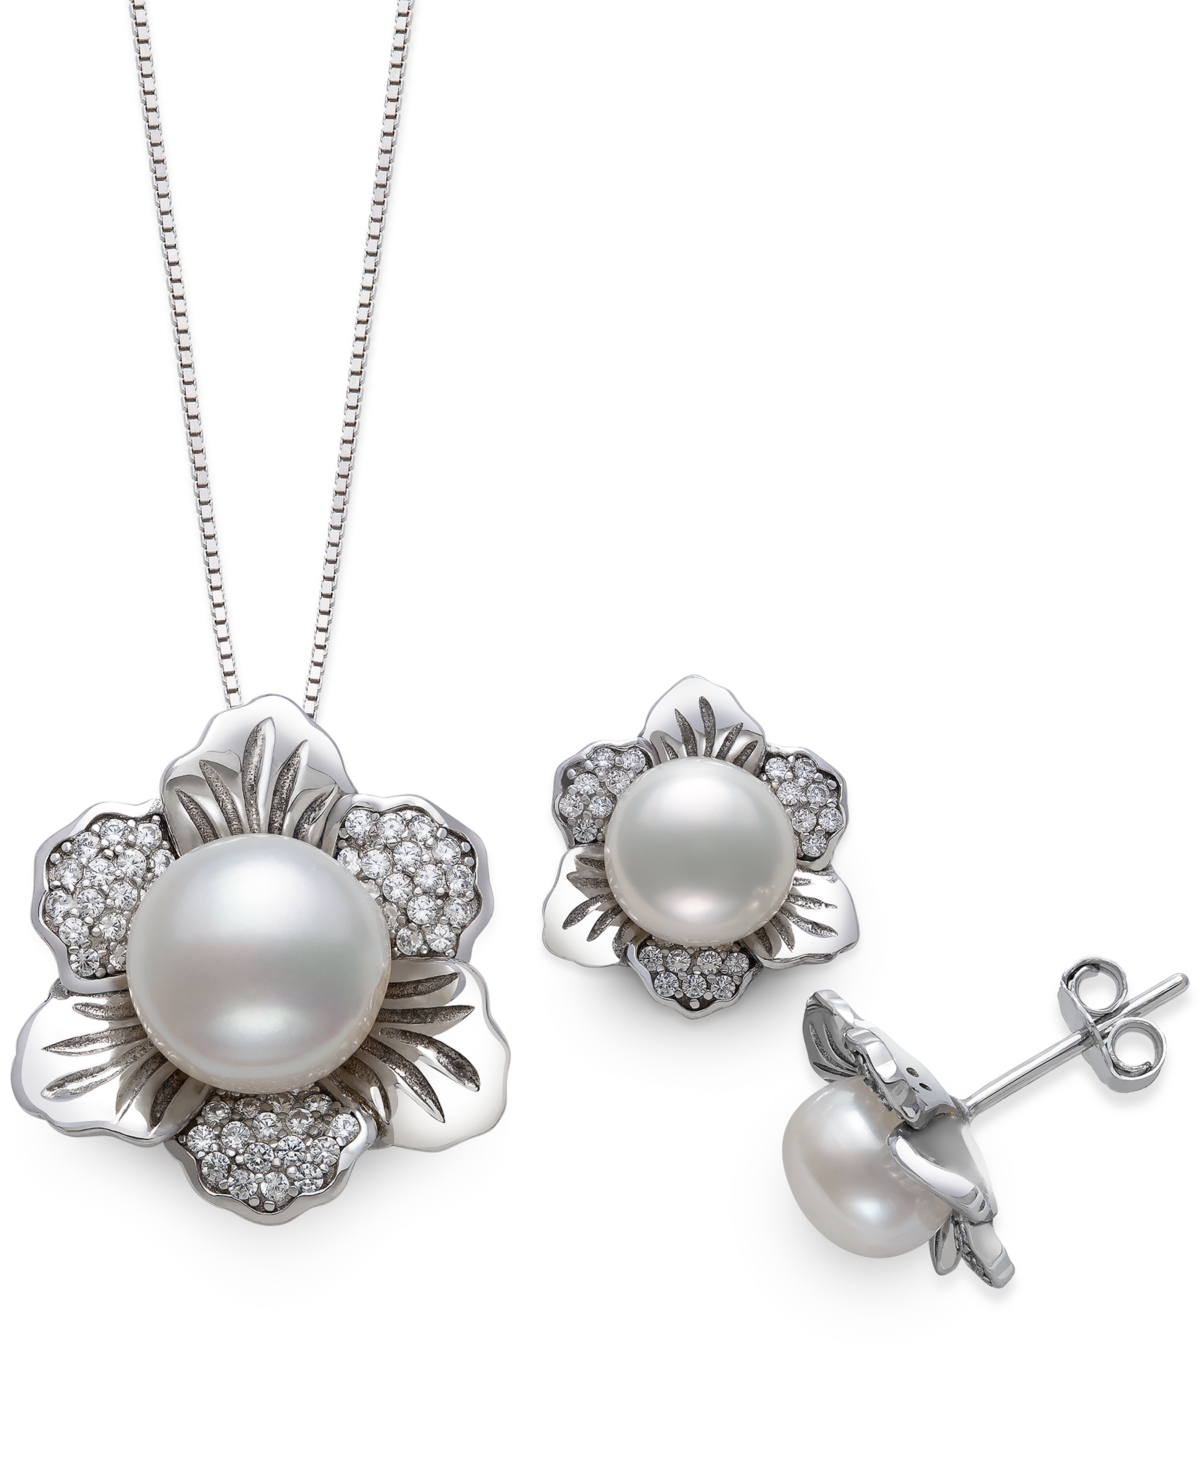 2-Pc. Set Cultured Freshwater Pearl (7 & 10mm) & Cubic Zirconia Flower Pendant Necklace & Matching Stud Earrings in Sterling Silver - Sil